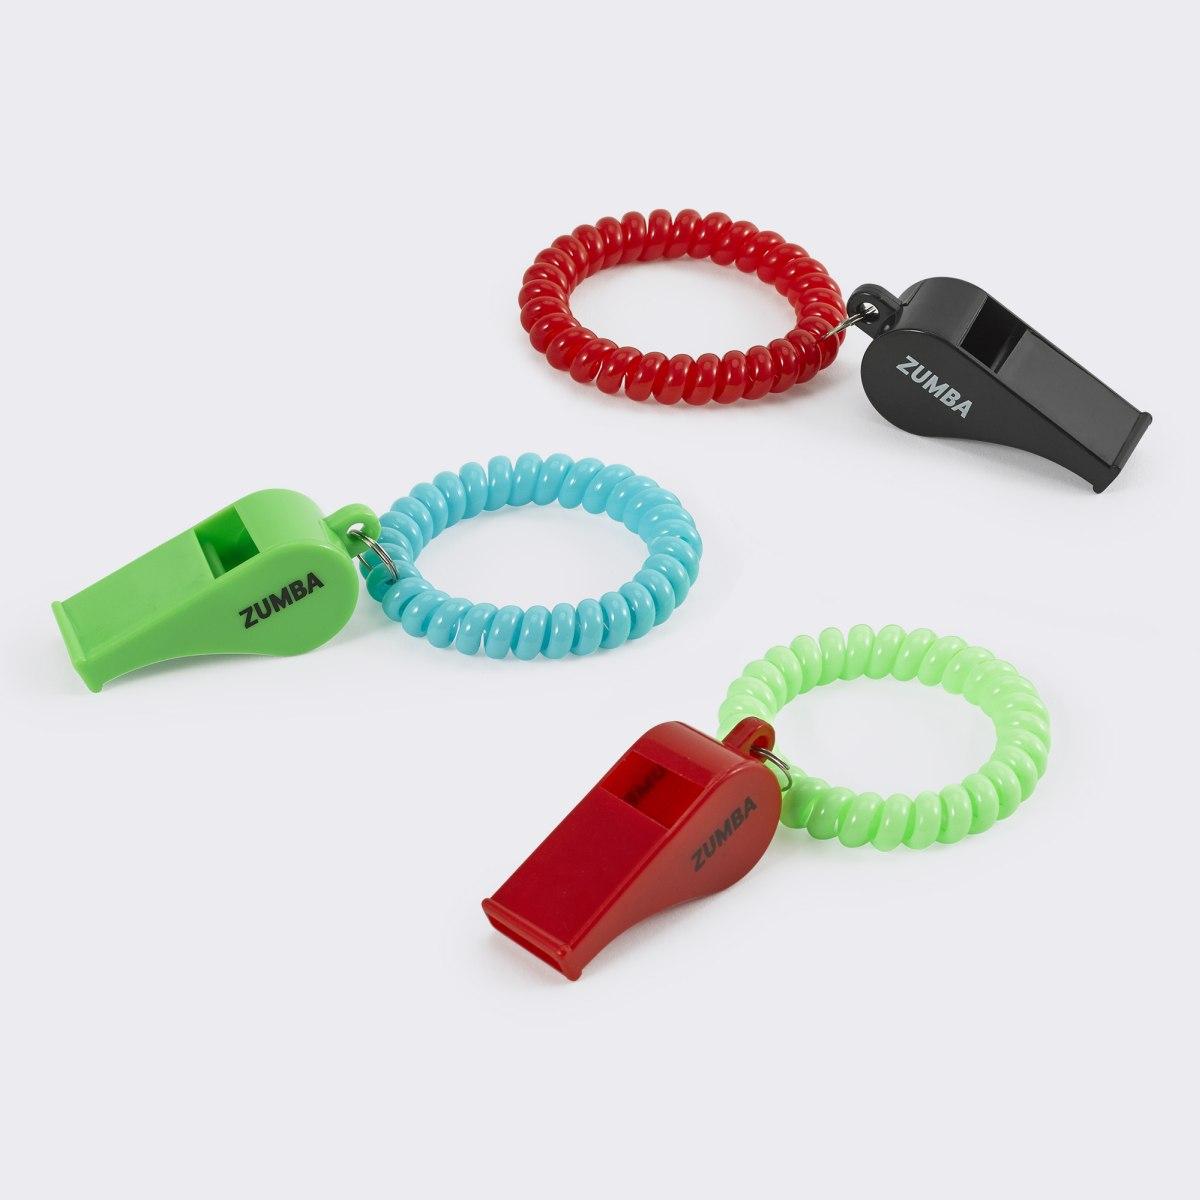 Zumba Spiral Hair Ties With Whistle 3PK